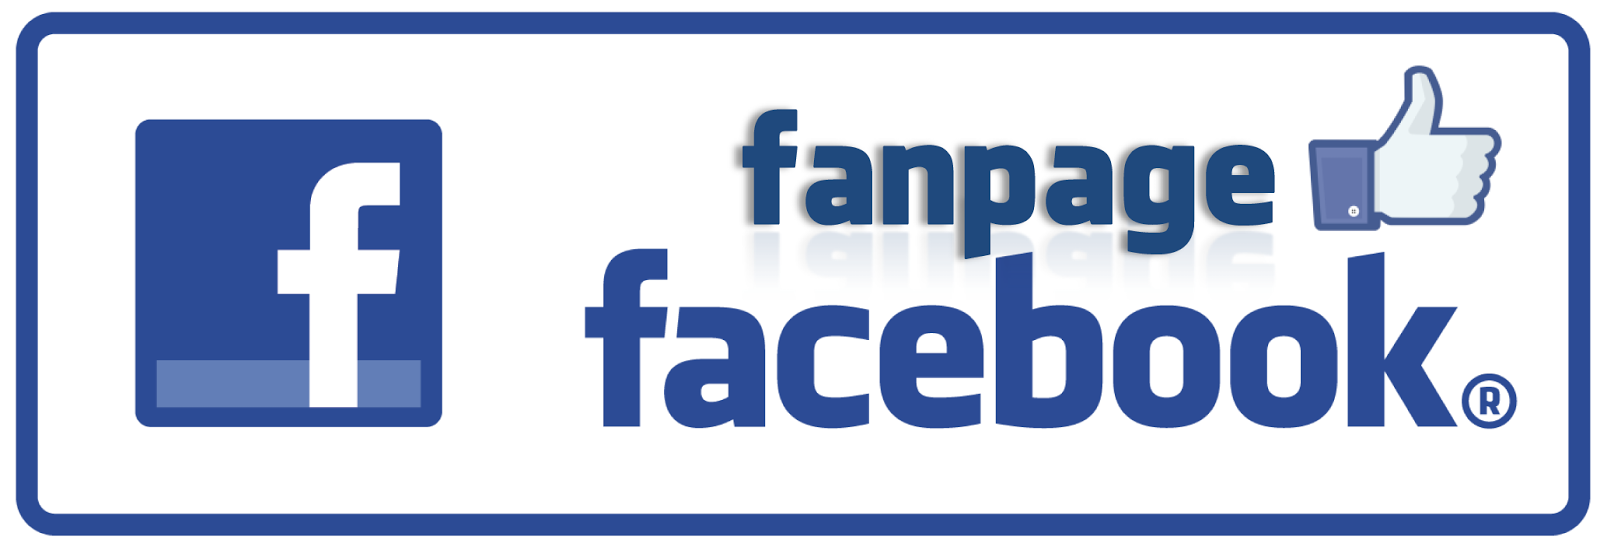 7 ways to SEO for Facebook Fanpage to be on Top 1 Google Search